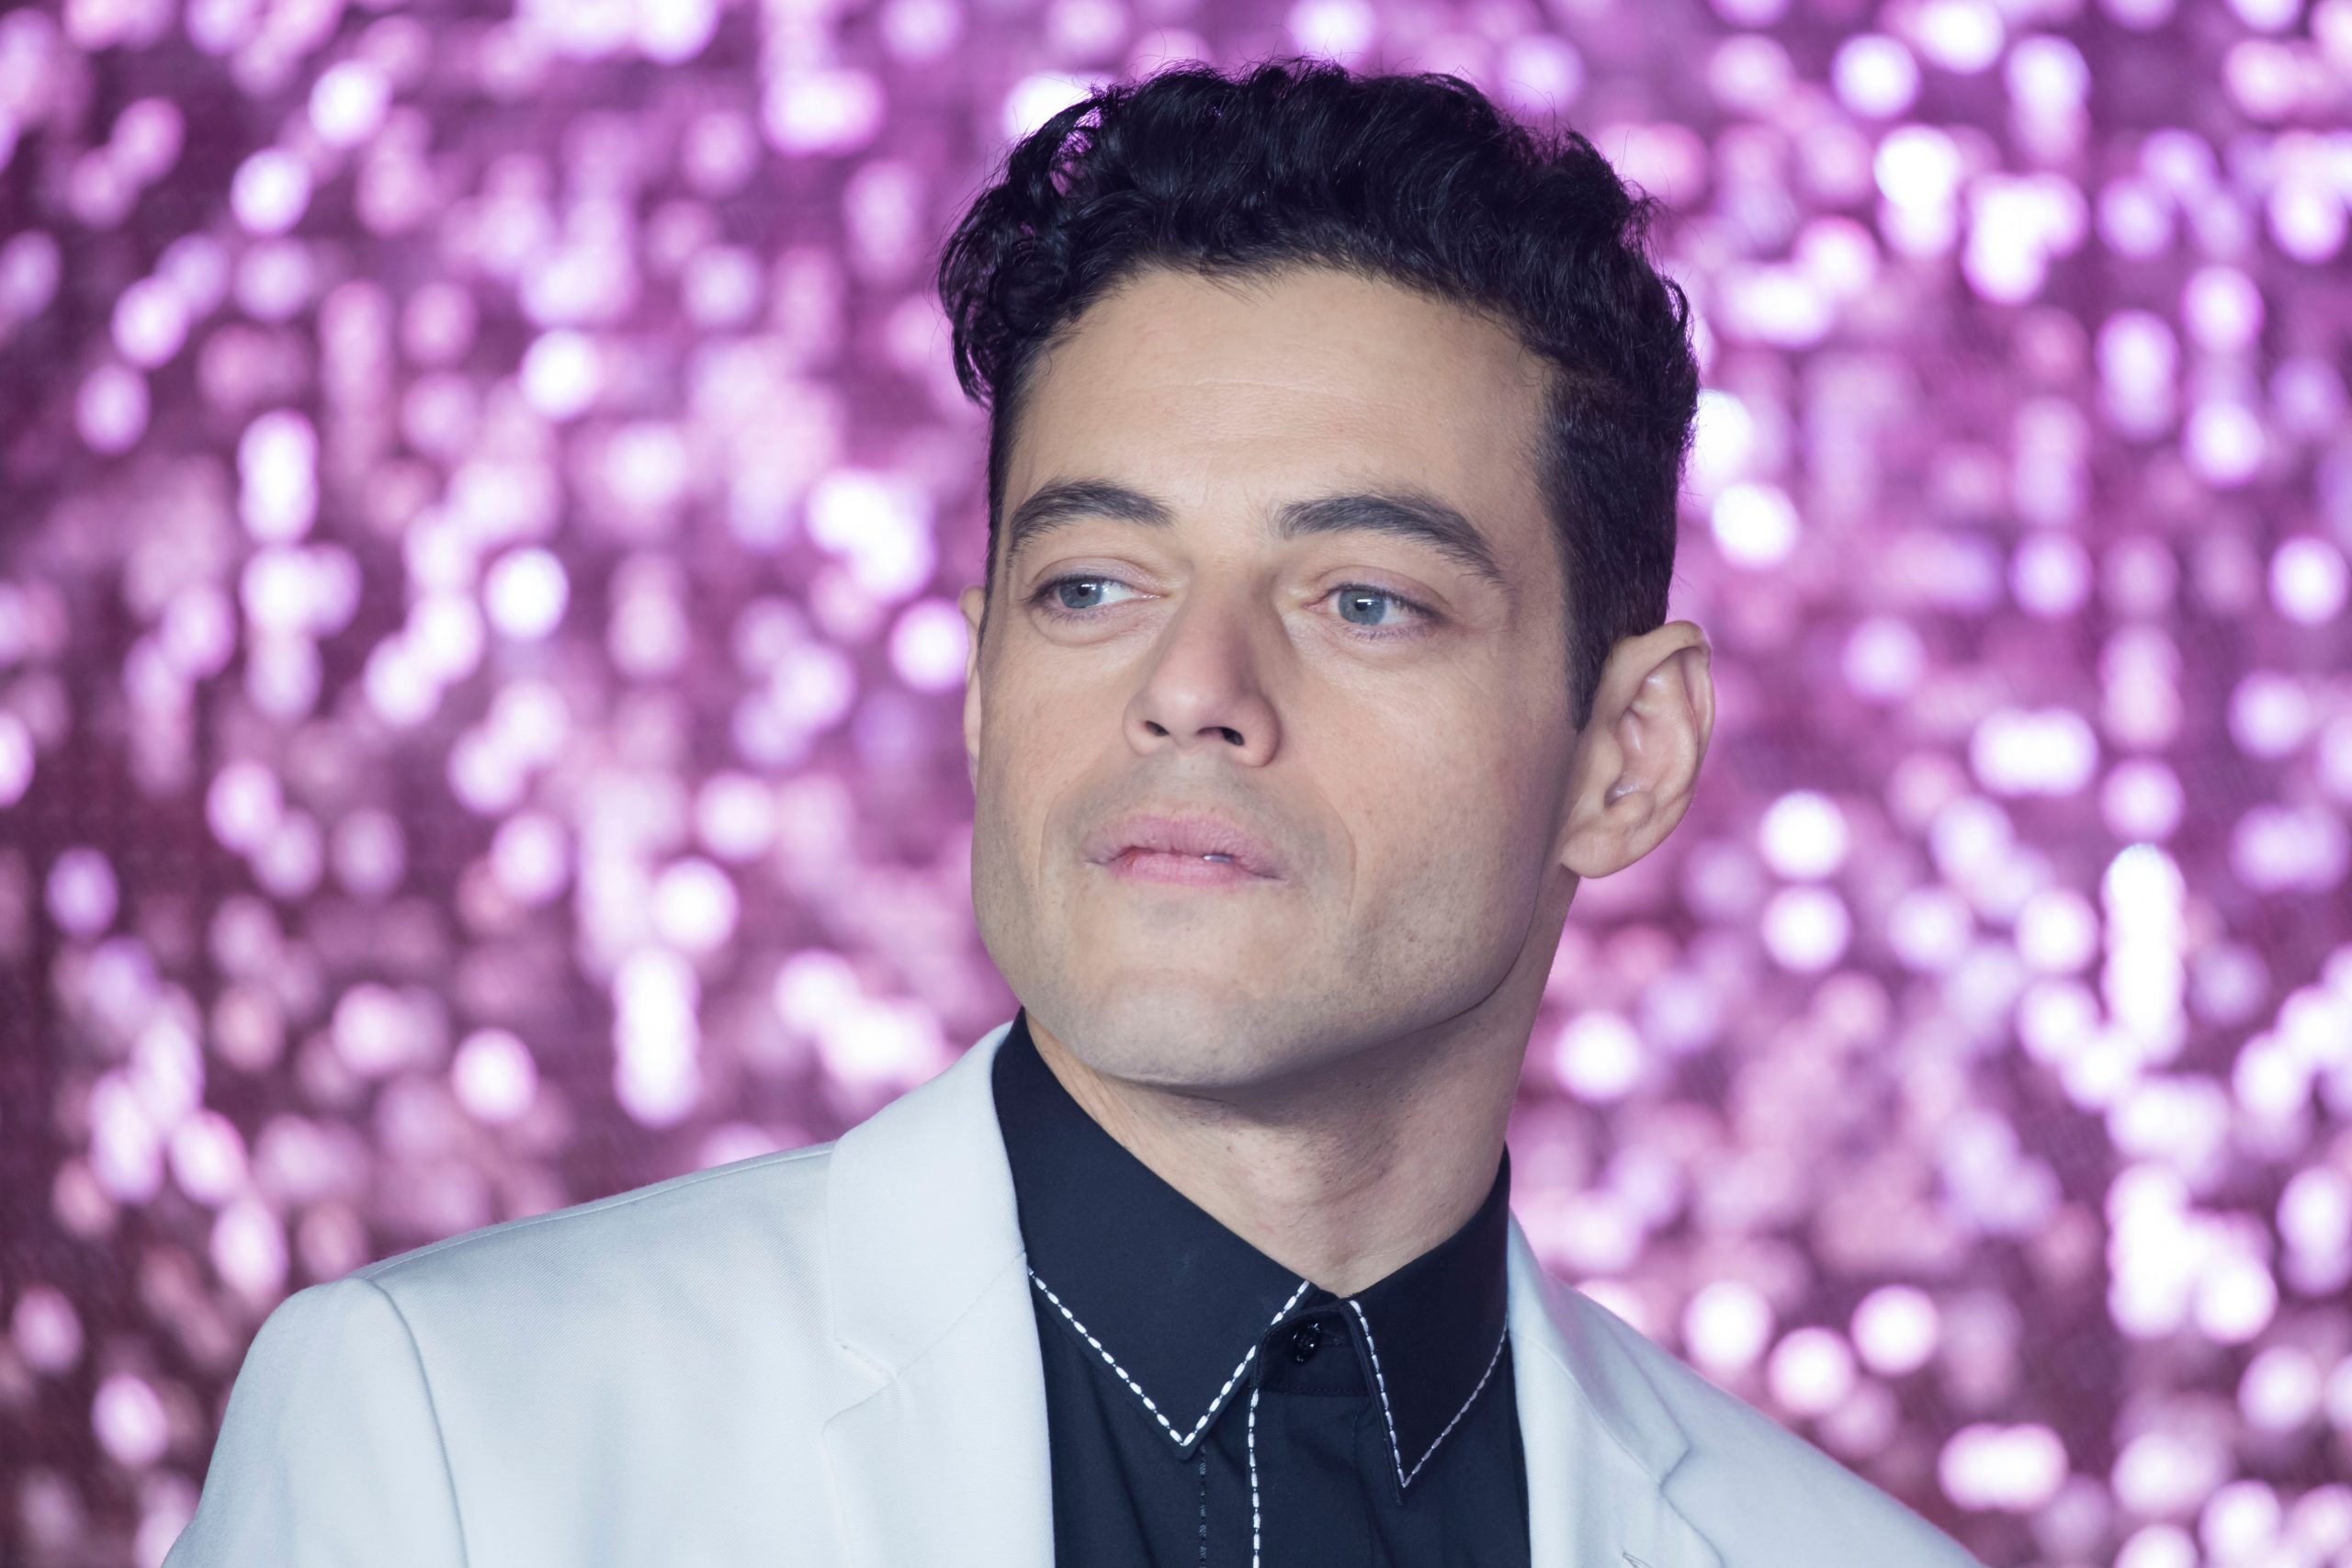 Here, it is about Rami Malek religion and political views. 